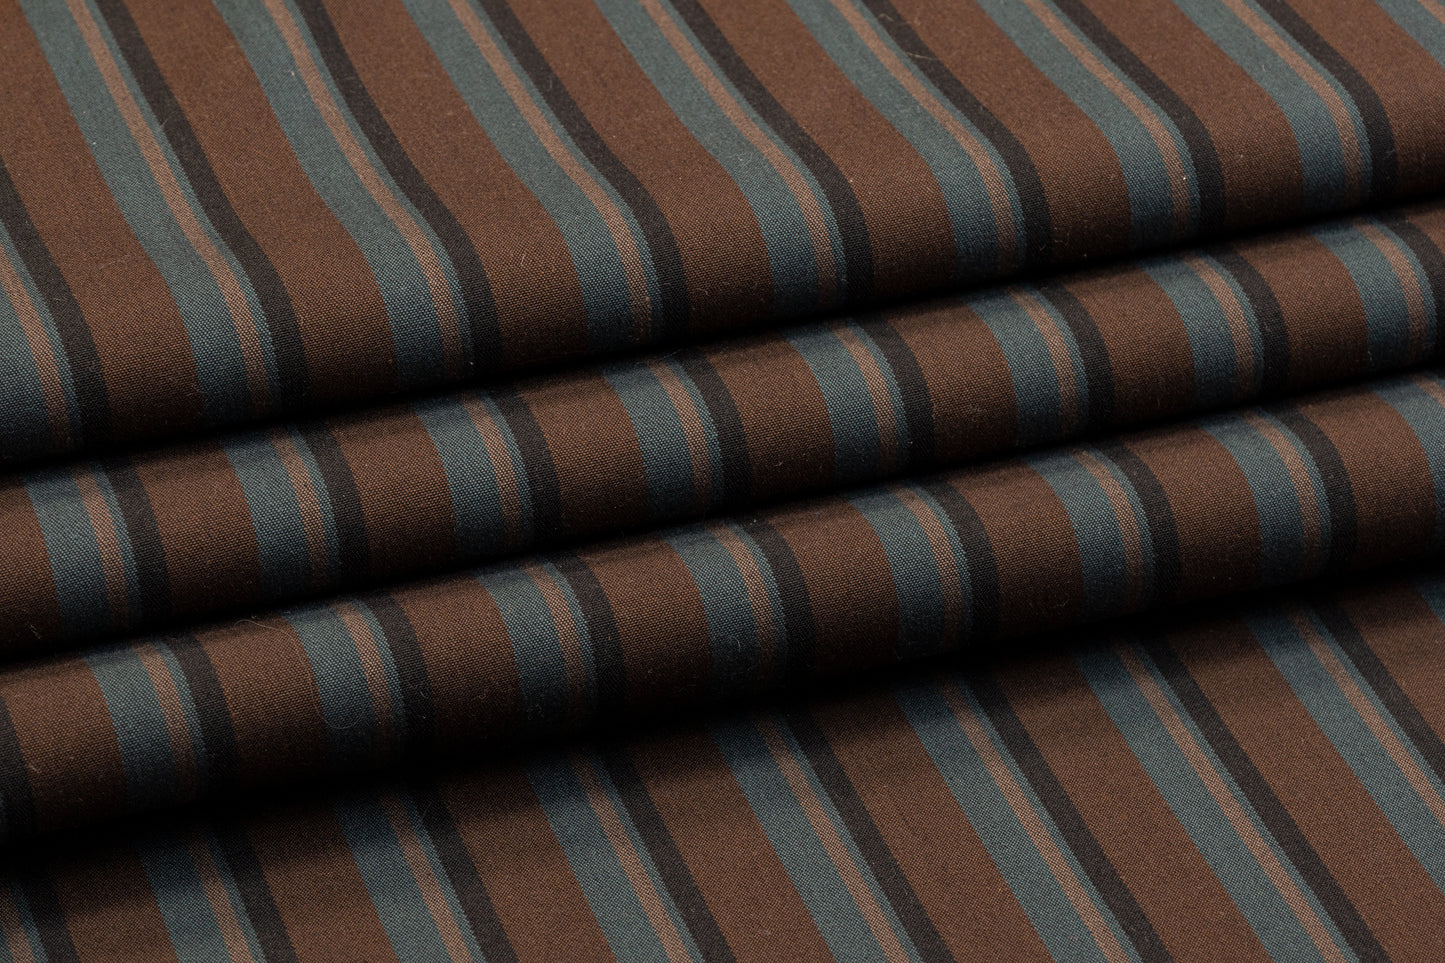 Striped Poly Cotton Twill - Brown, Teal, Black